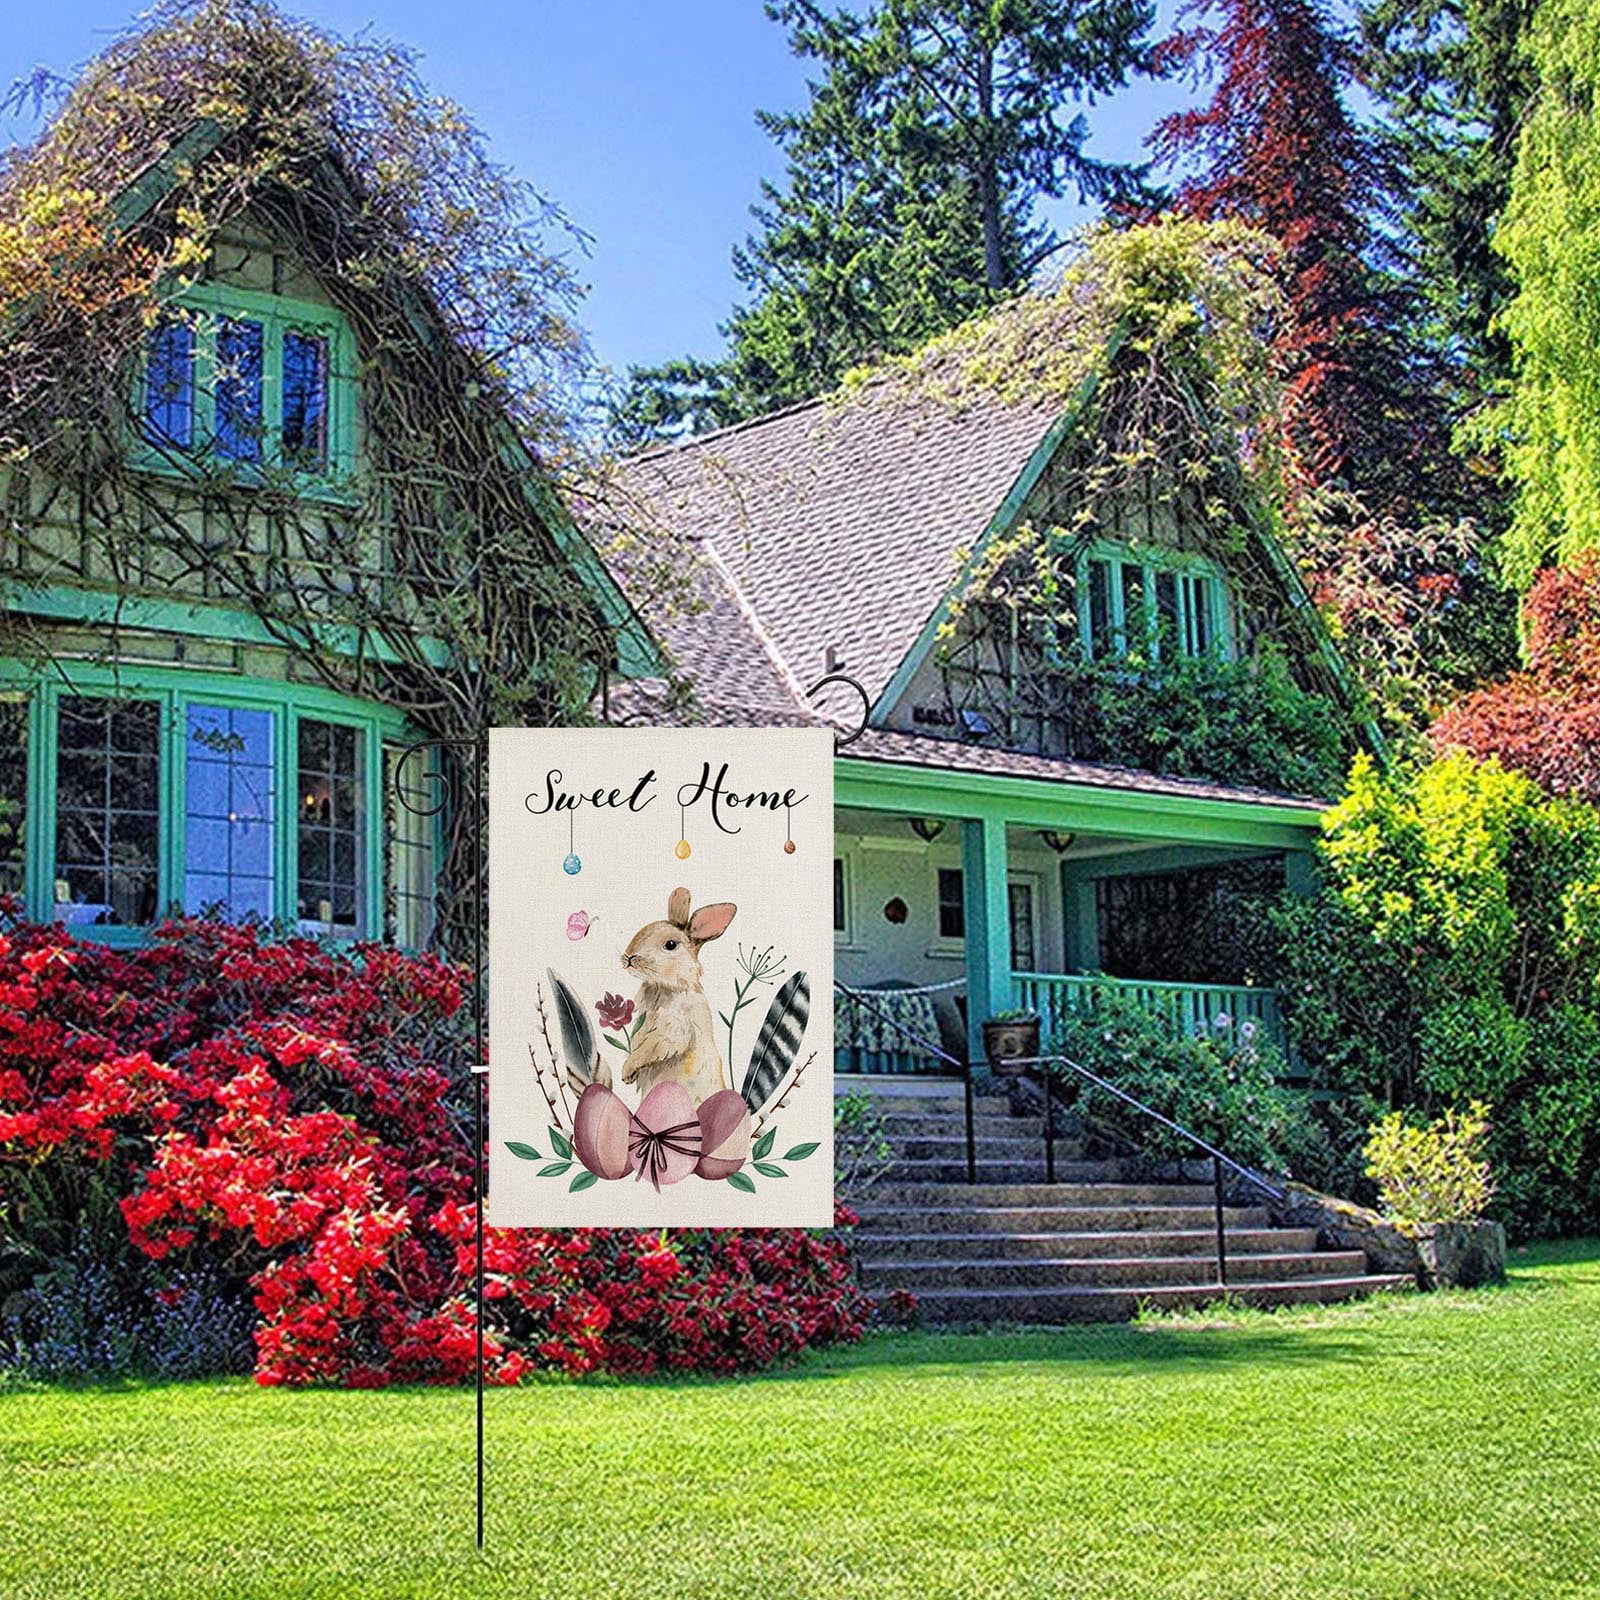 Pet Dog and Welcome Garden Flag House Yard Decor Banner Linen Double-sided 